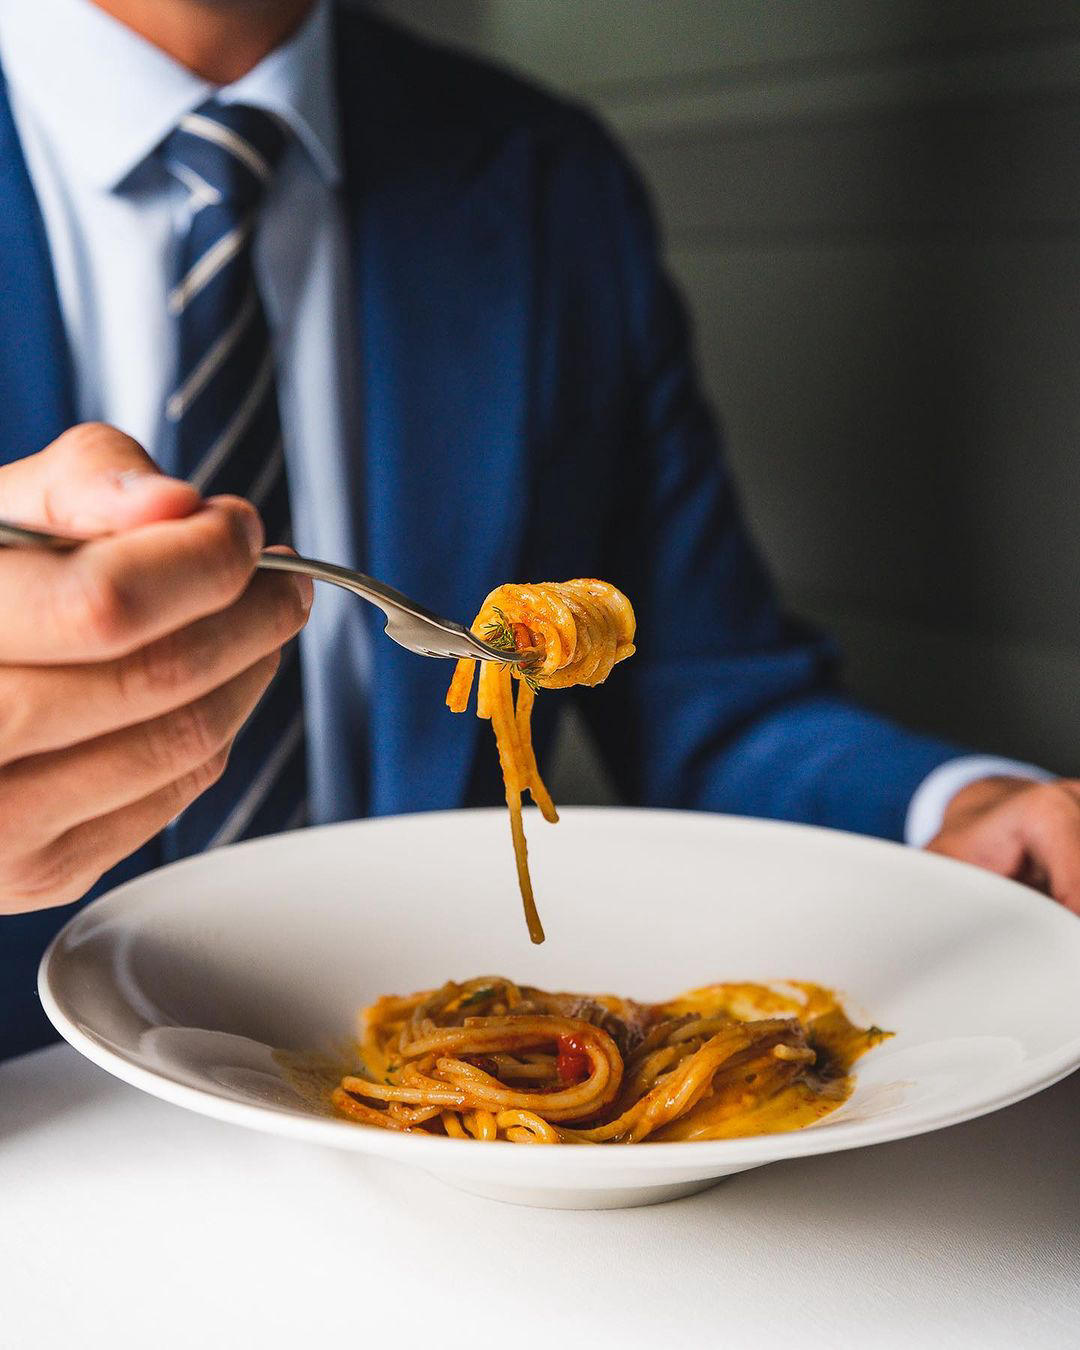 Hotel VIU Milan - Add a touch of sophistication to your business lunch - spaghetti with delectable s